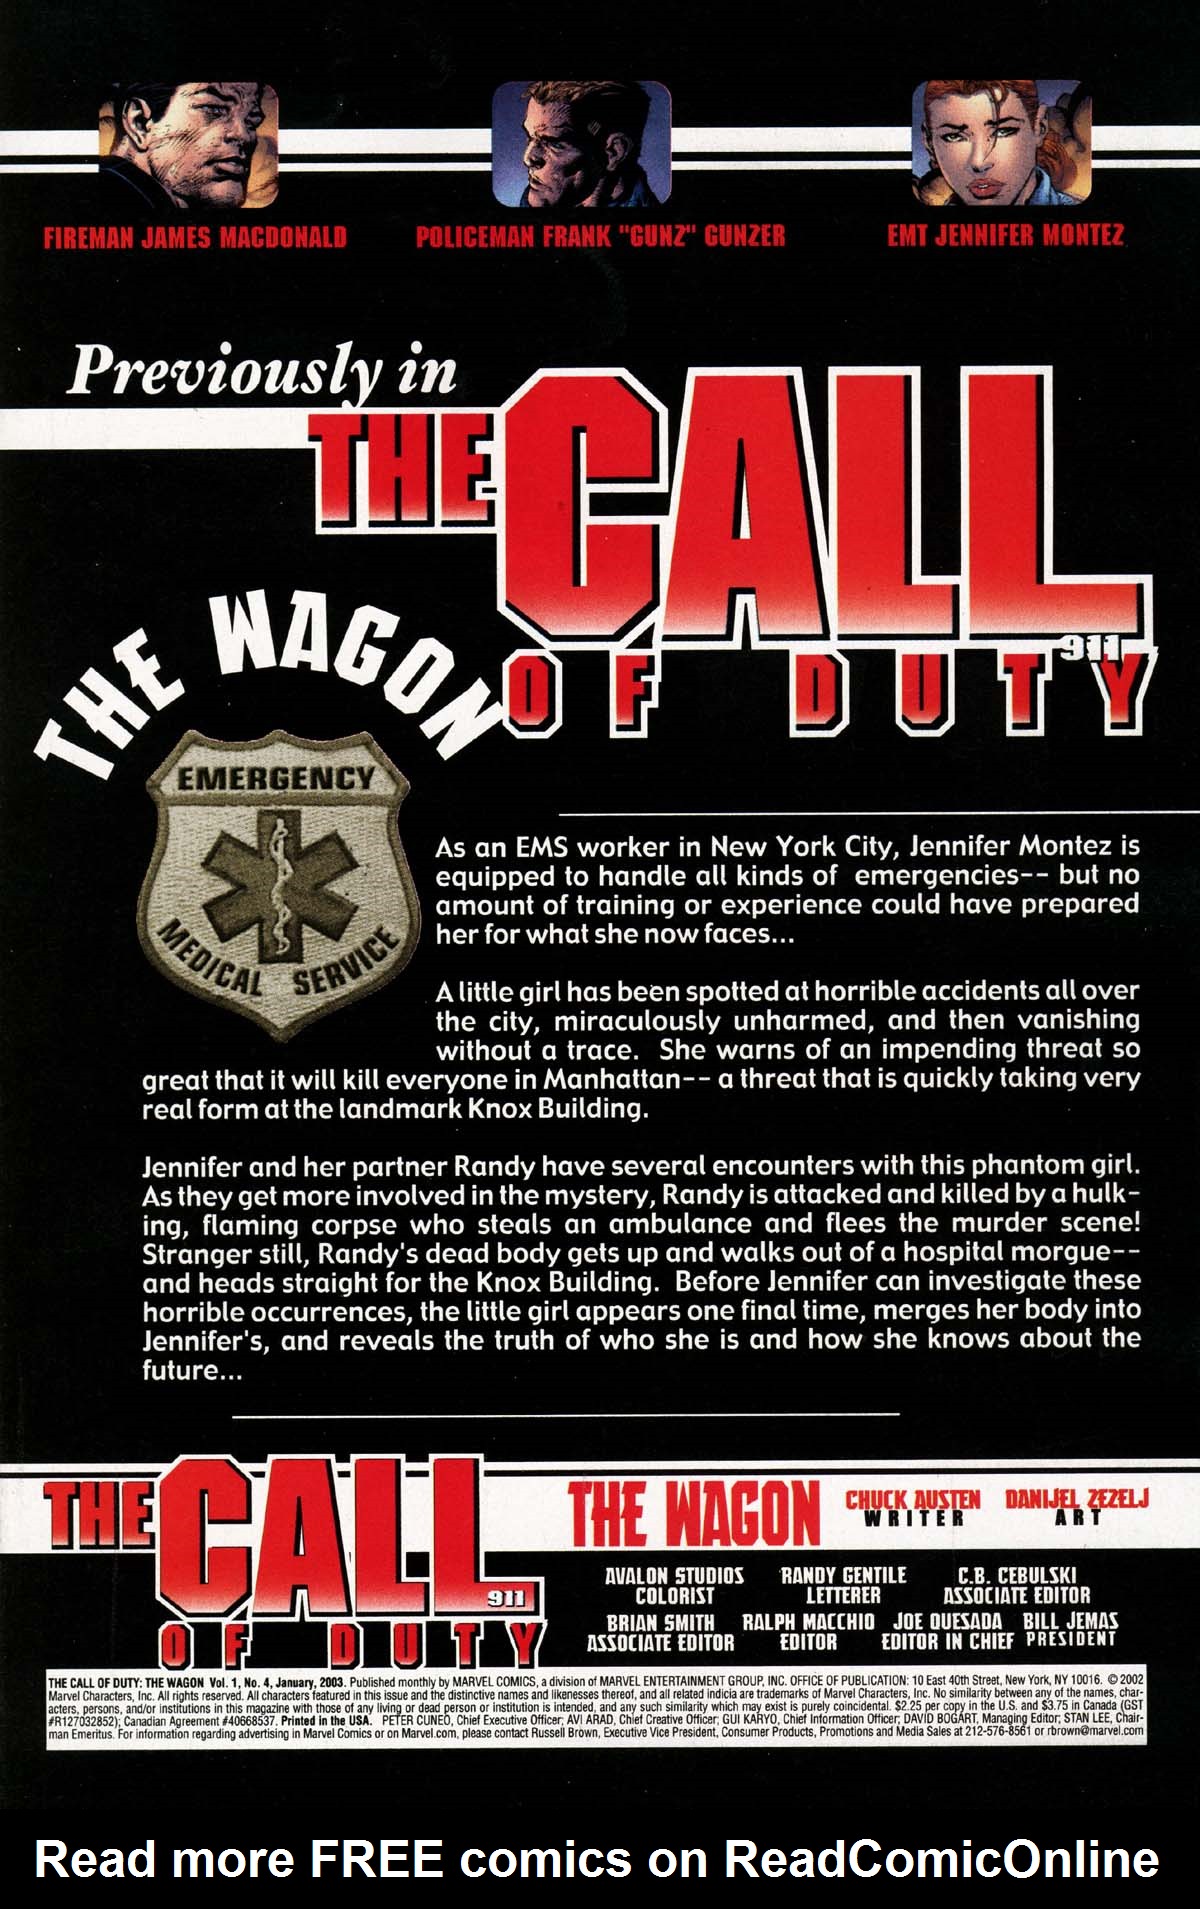 Read online The Call of Duty: The Wagon comic -  Issue #4 - 2